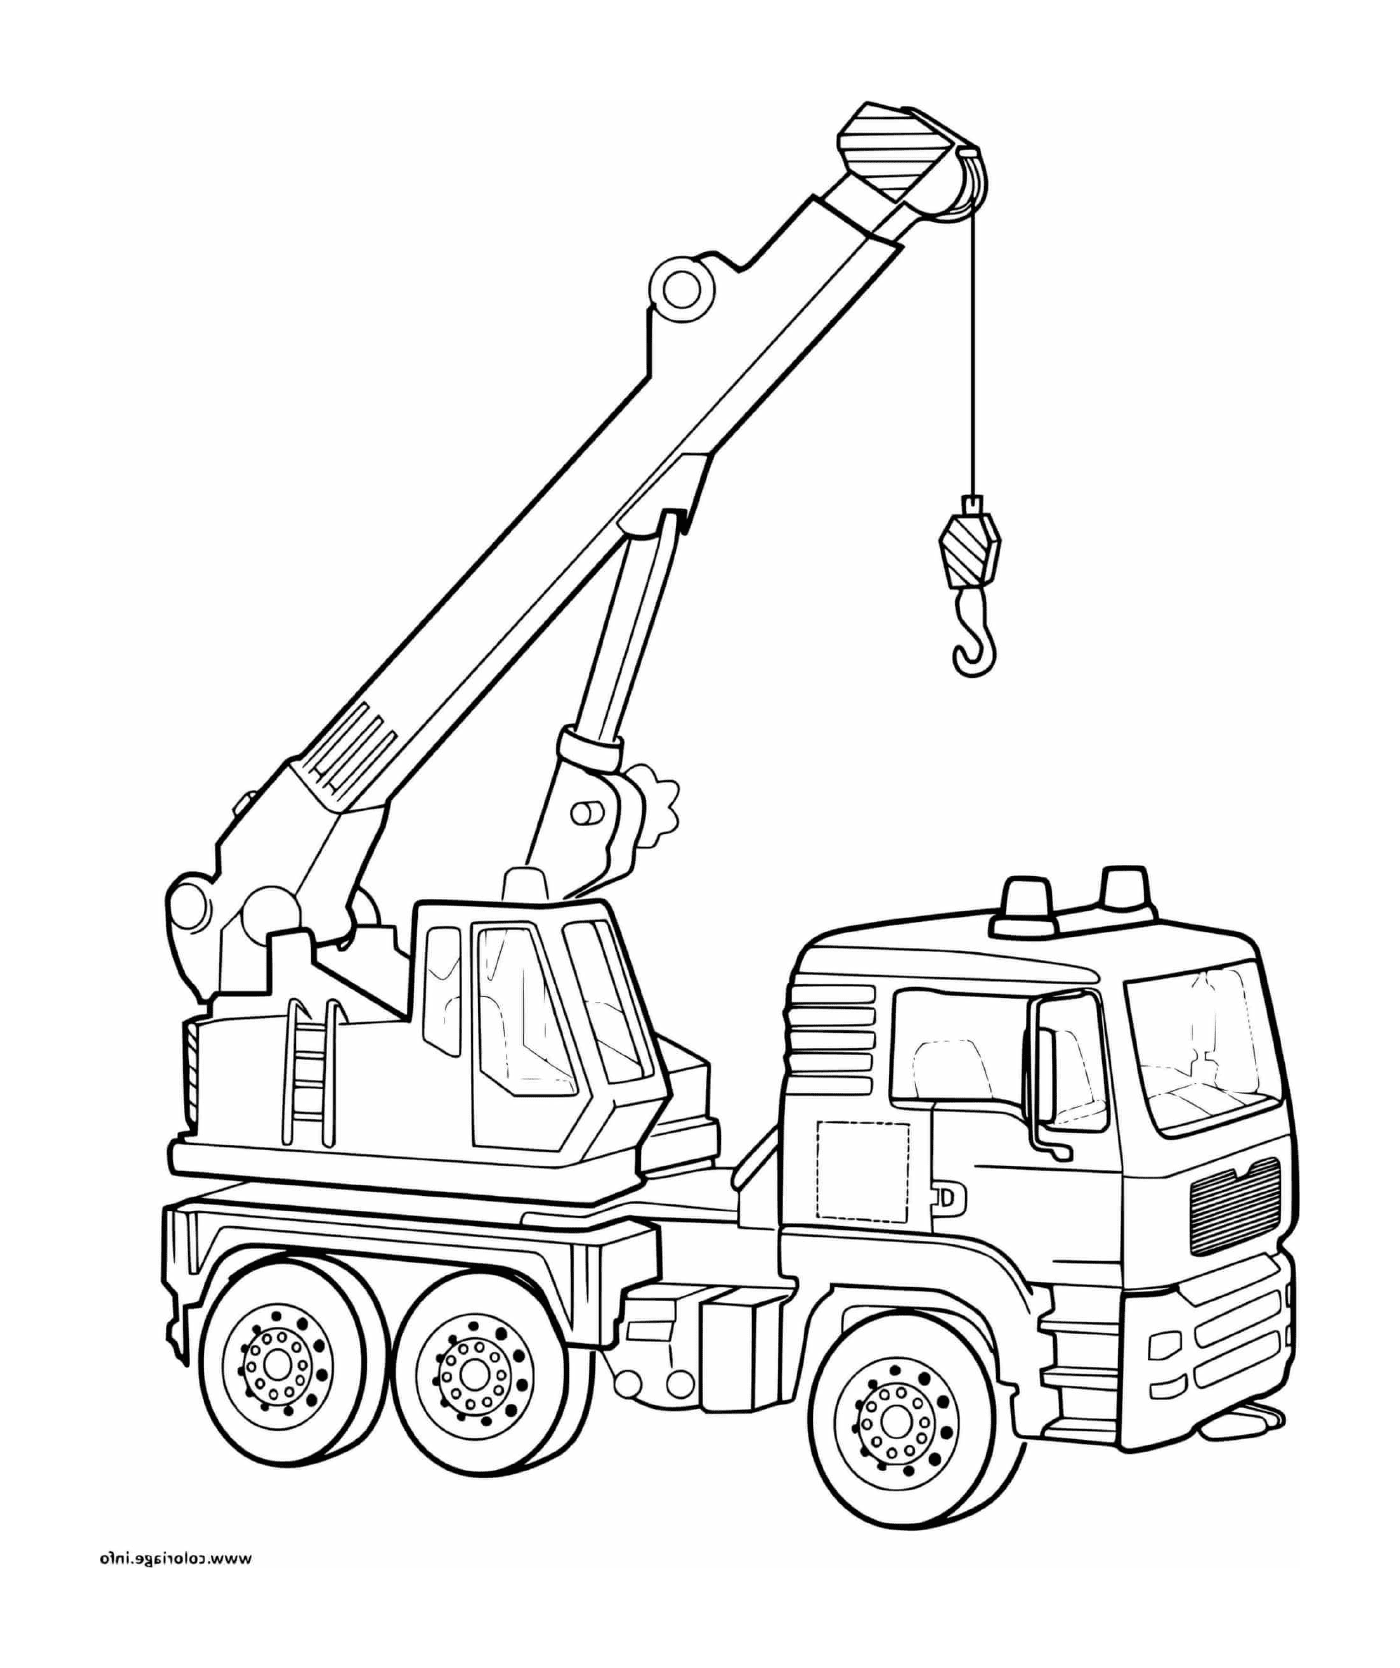  A crane truck used on a construction site 